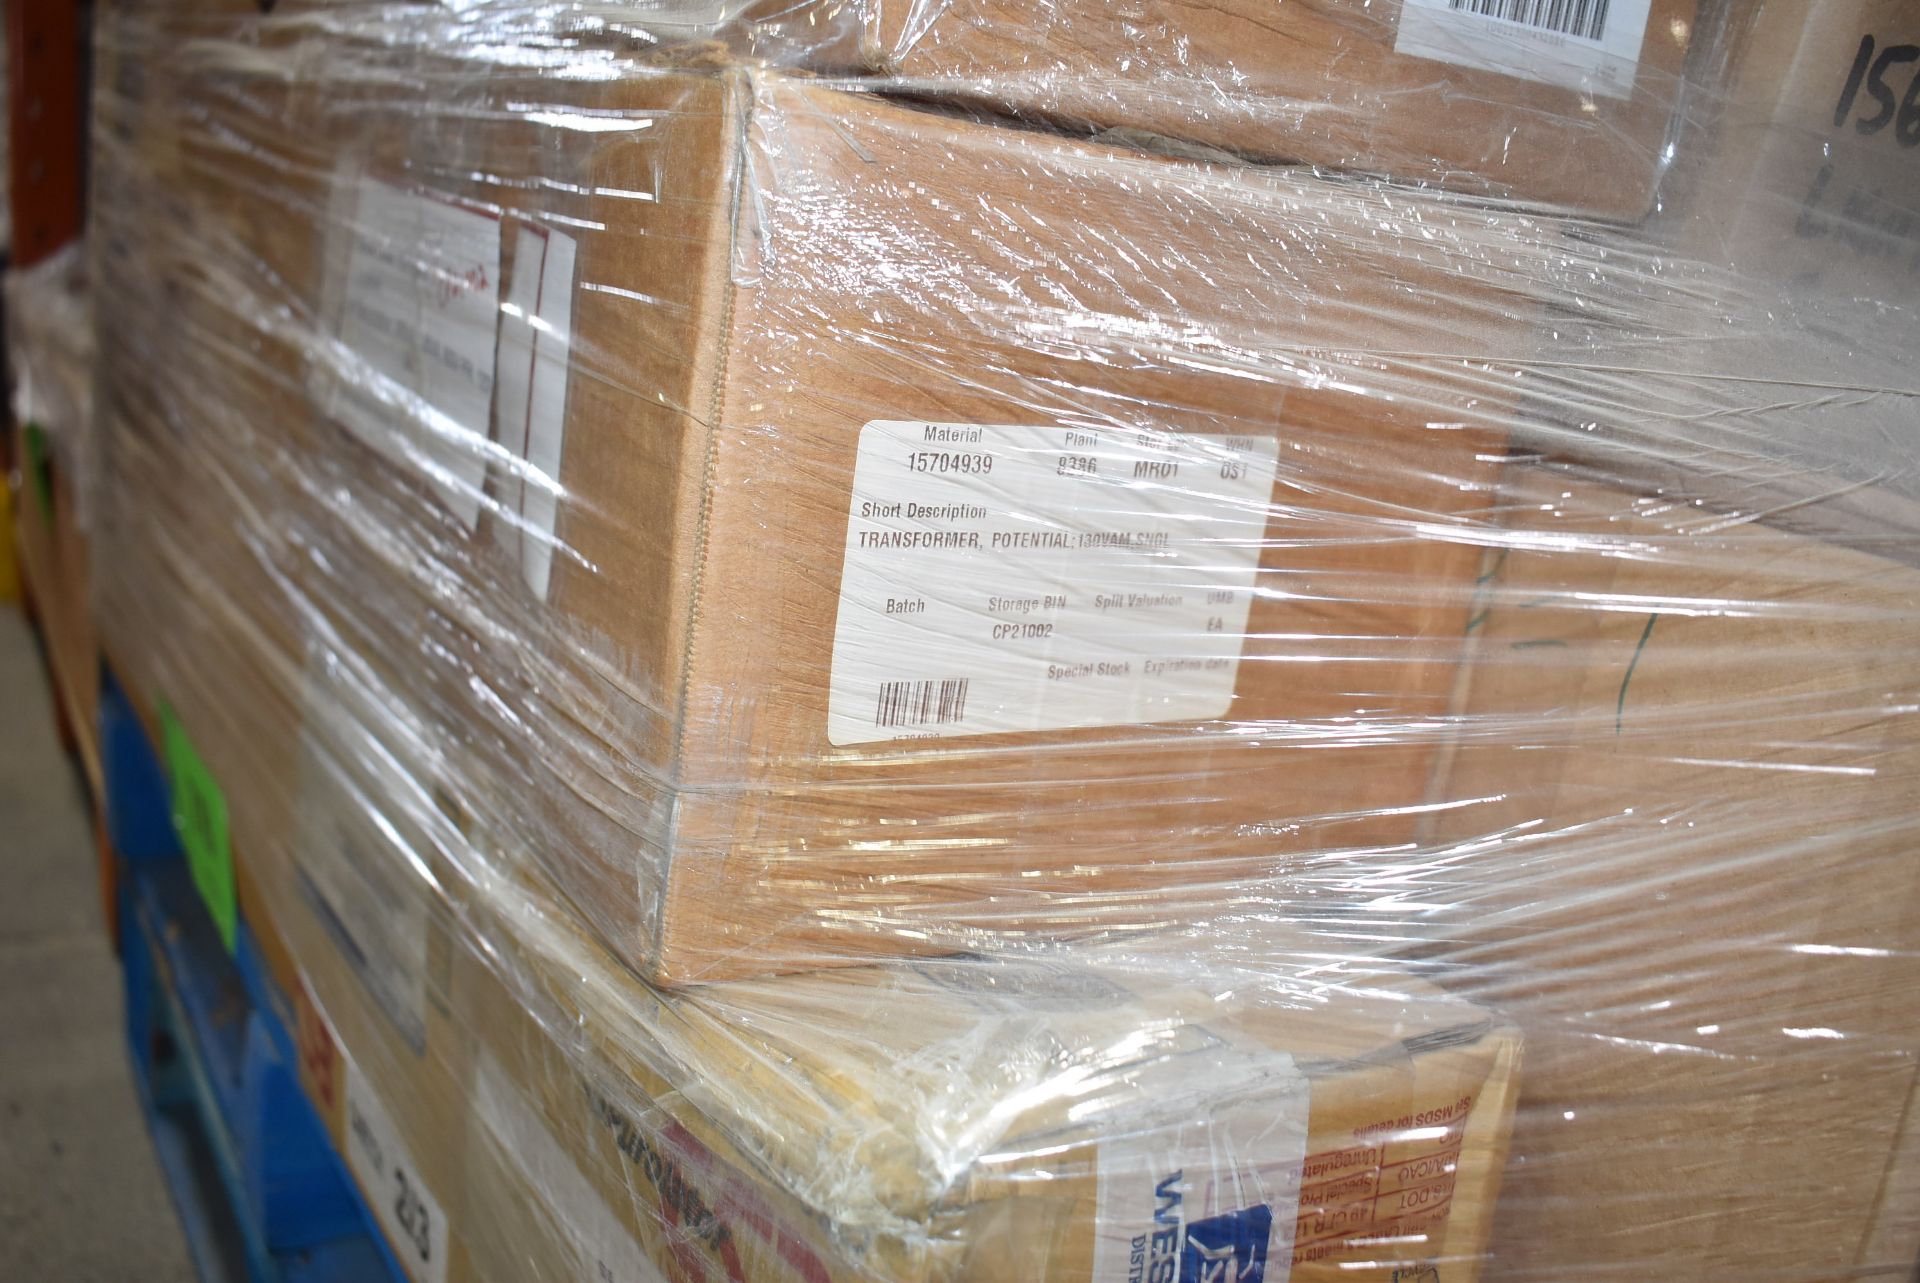 LOT/ PALLET OF SPARE PARTS CONSISTING OF TRANSFORMERS, LAMPS, TEES, MARKERS, BASEBOARD HEATERS, TOOL - Image 5 of 7